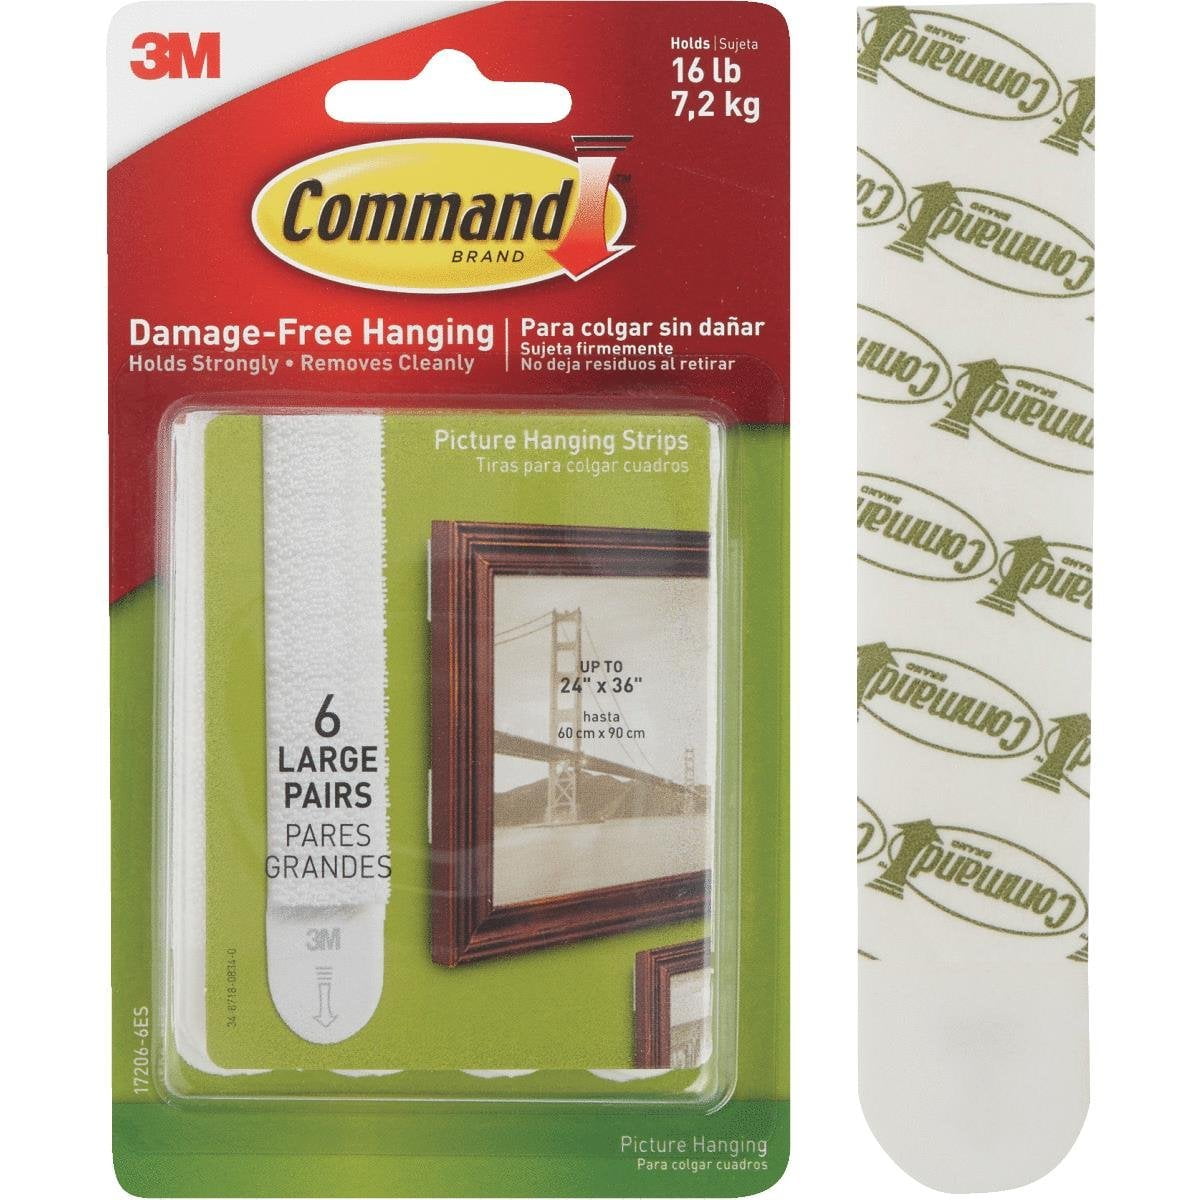 Command 16 lb Large White Picture Hanging Strips, 6 pairs 12 strips, Indoor  Use, Decorate Damage-Free 17206-6ES